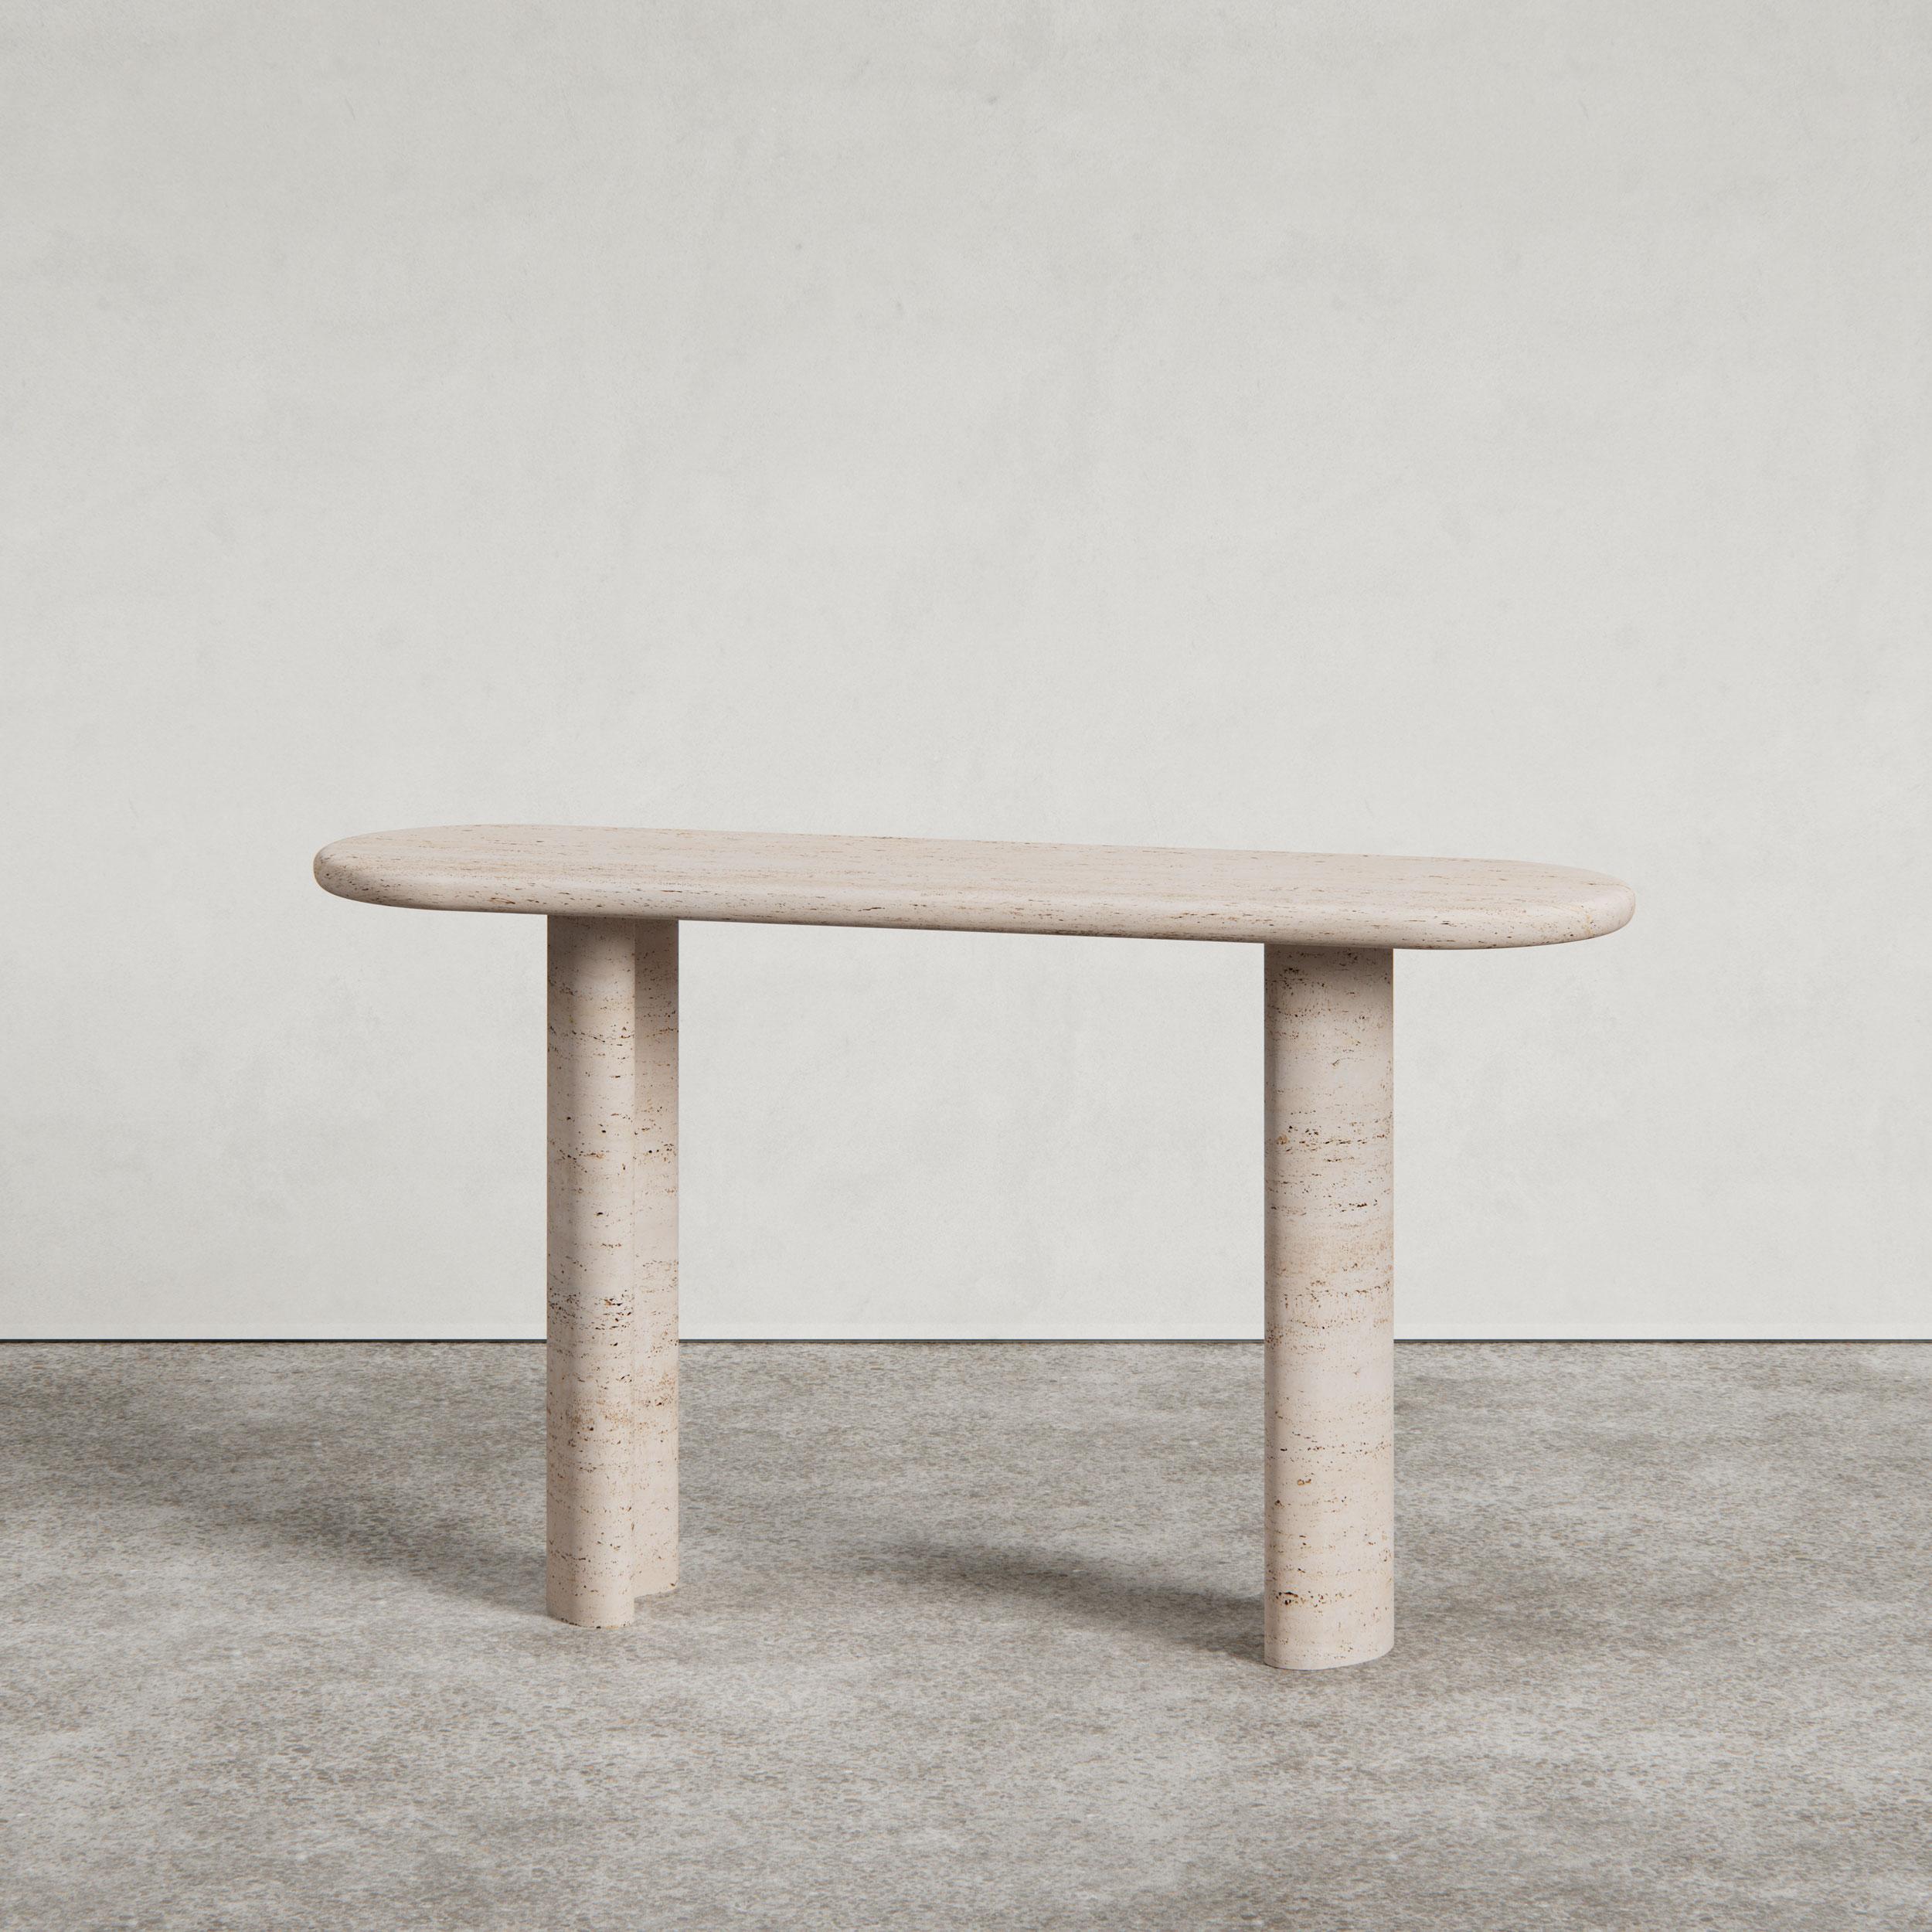 Introducing the Pietra Console; a new addition to the Pietra collection.

Designed by Just Adele. This design is carved from a single block of Italian natural stone to create organic curves and kidney-shaped legs. Available in Viola Monet and